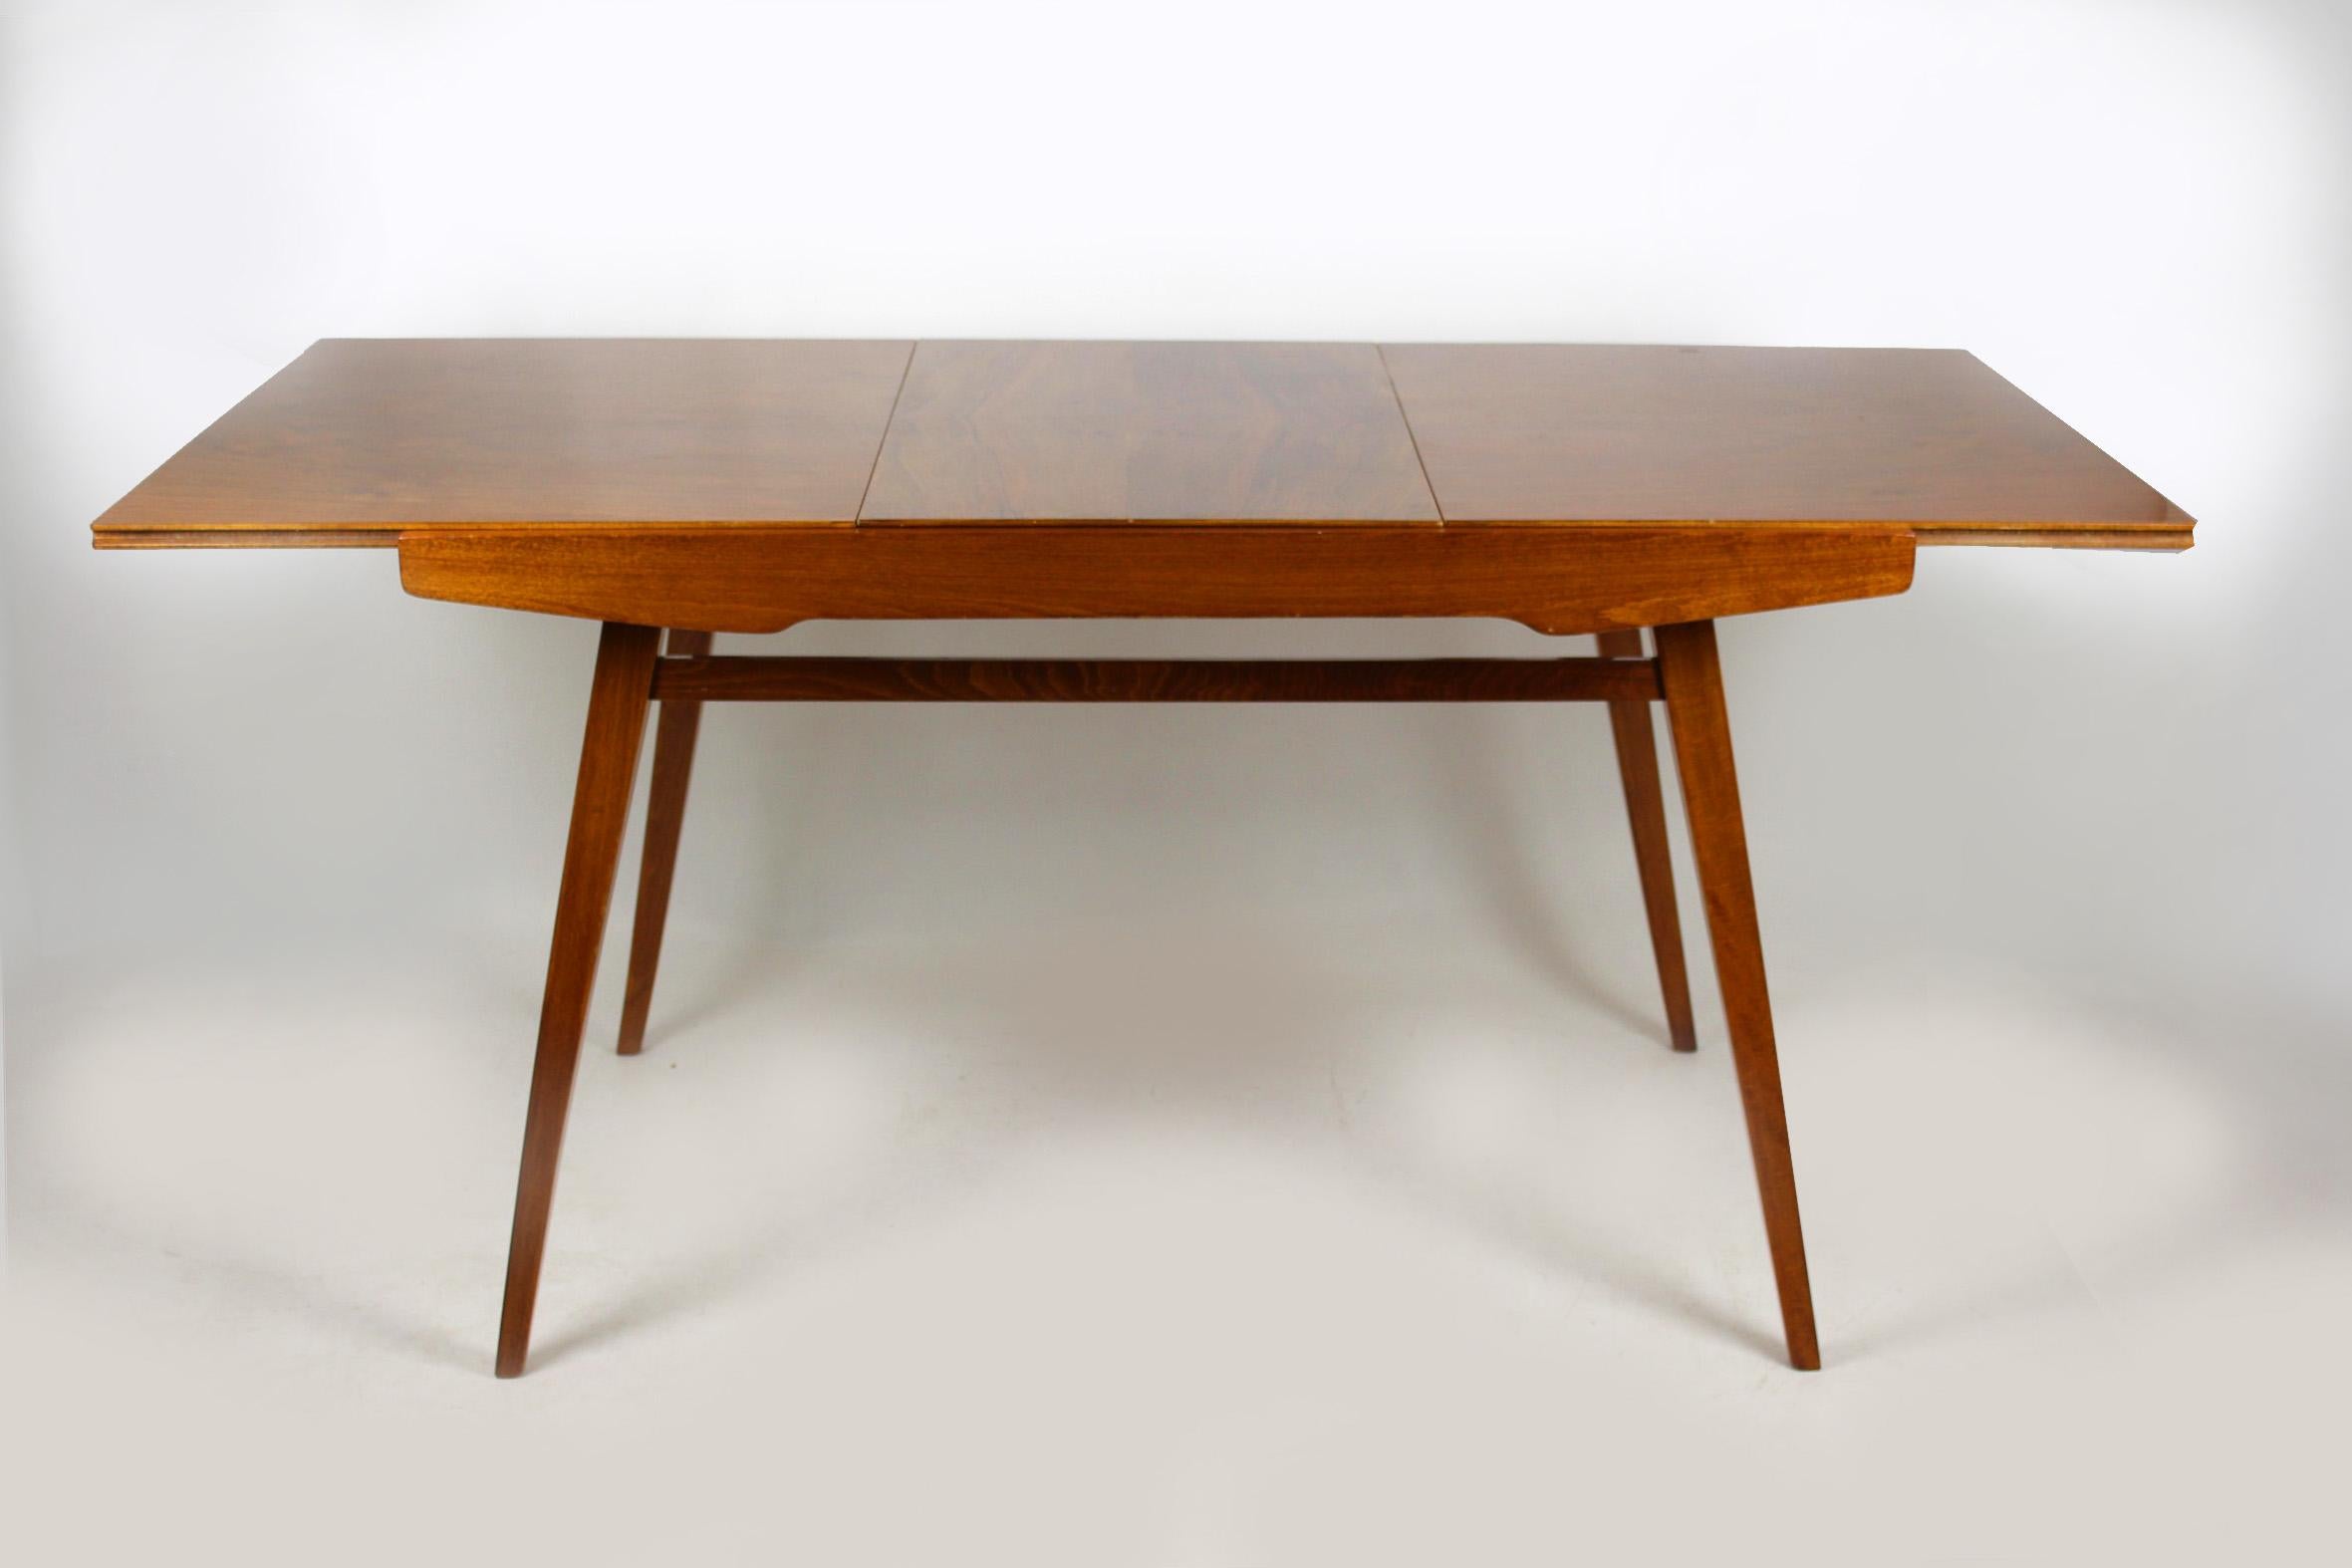 This walnut veneered folding dining table was manufactured by Tatra in the 1960s. The table measures 165cm wide when fully extended.